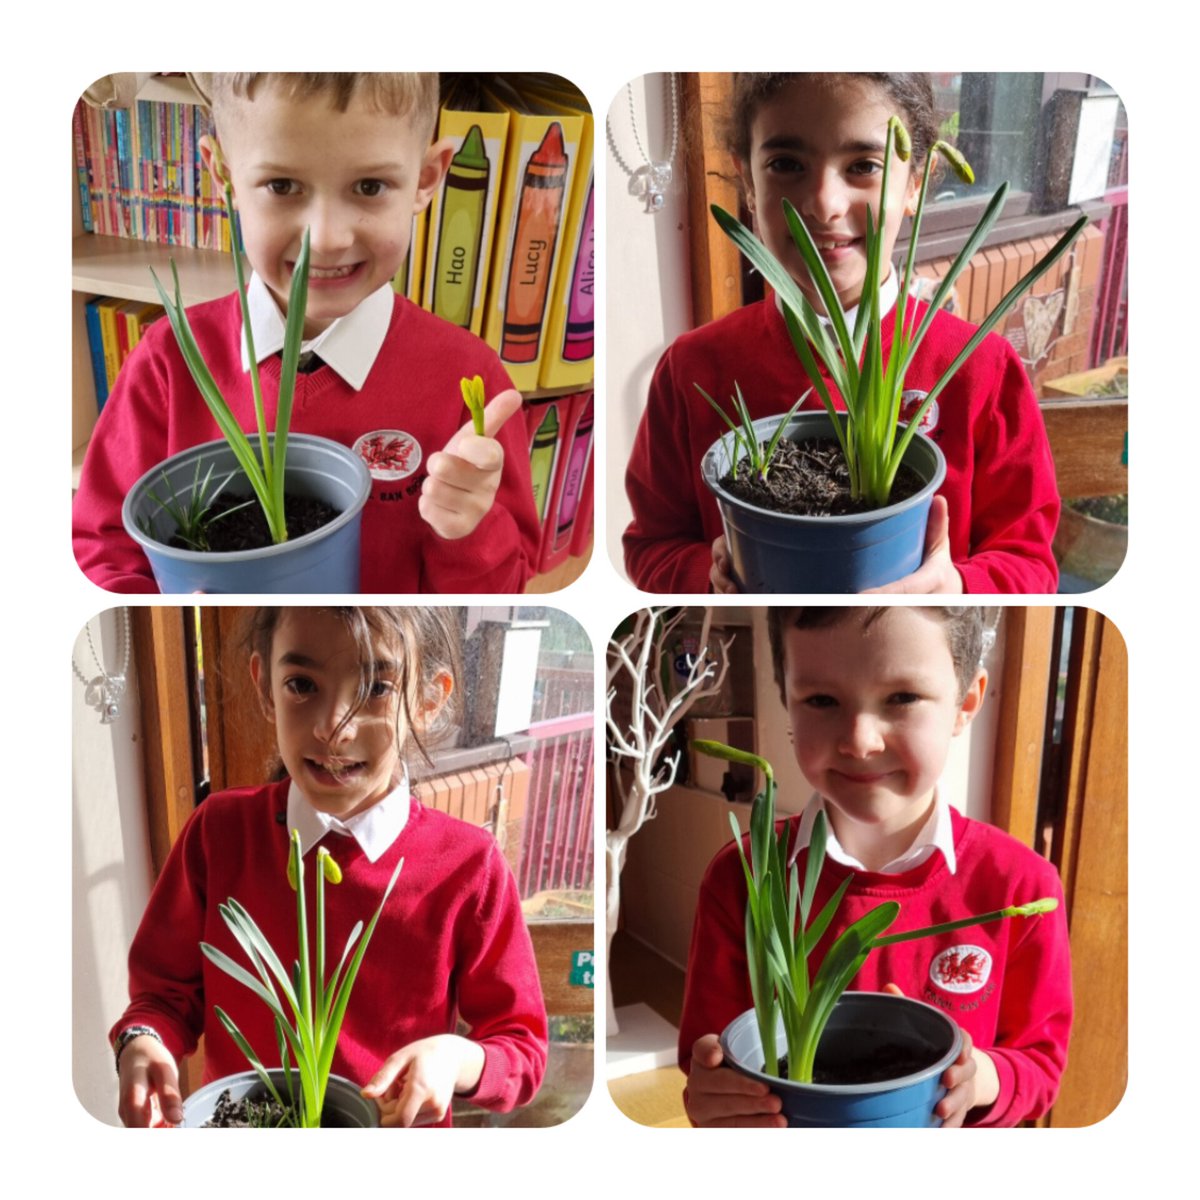 All the data from Dosbarth Haulfre has been inputted. Not all of us had our bulbs flower but we all enjoyed participating in the project. We hope our data is useful to @Professor_Plant #DosbarthHaulfre #SpringBulbProject #BulbBuddies #EdinaTrust